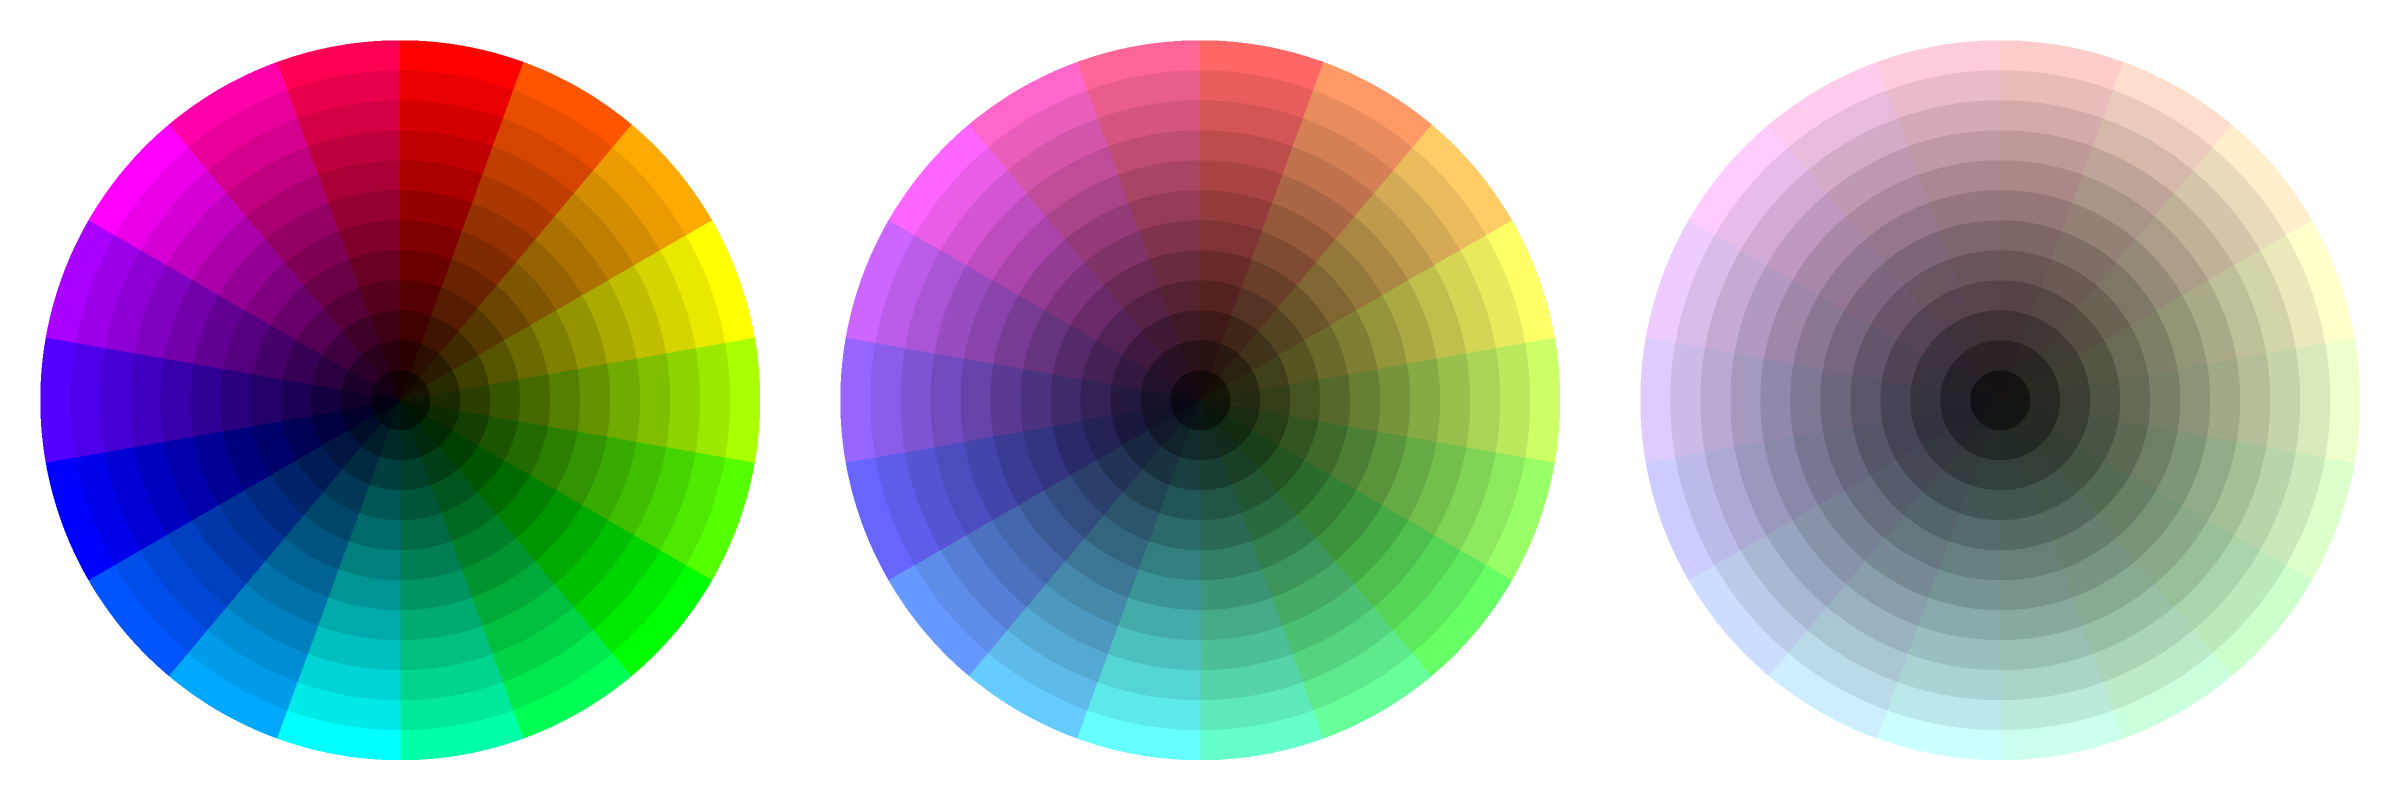 color-wheel-hsv-fixed-saturation-three.png